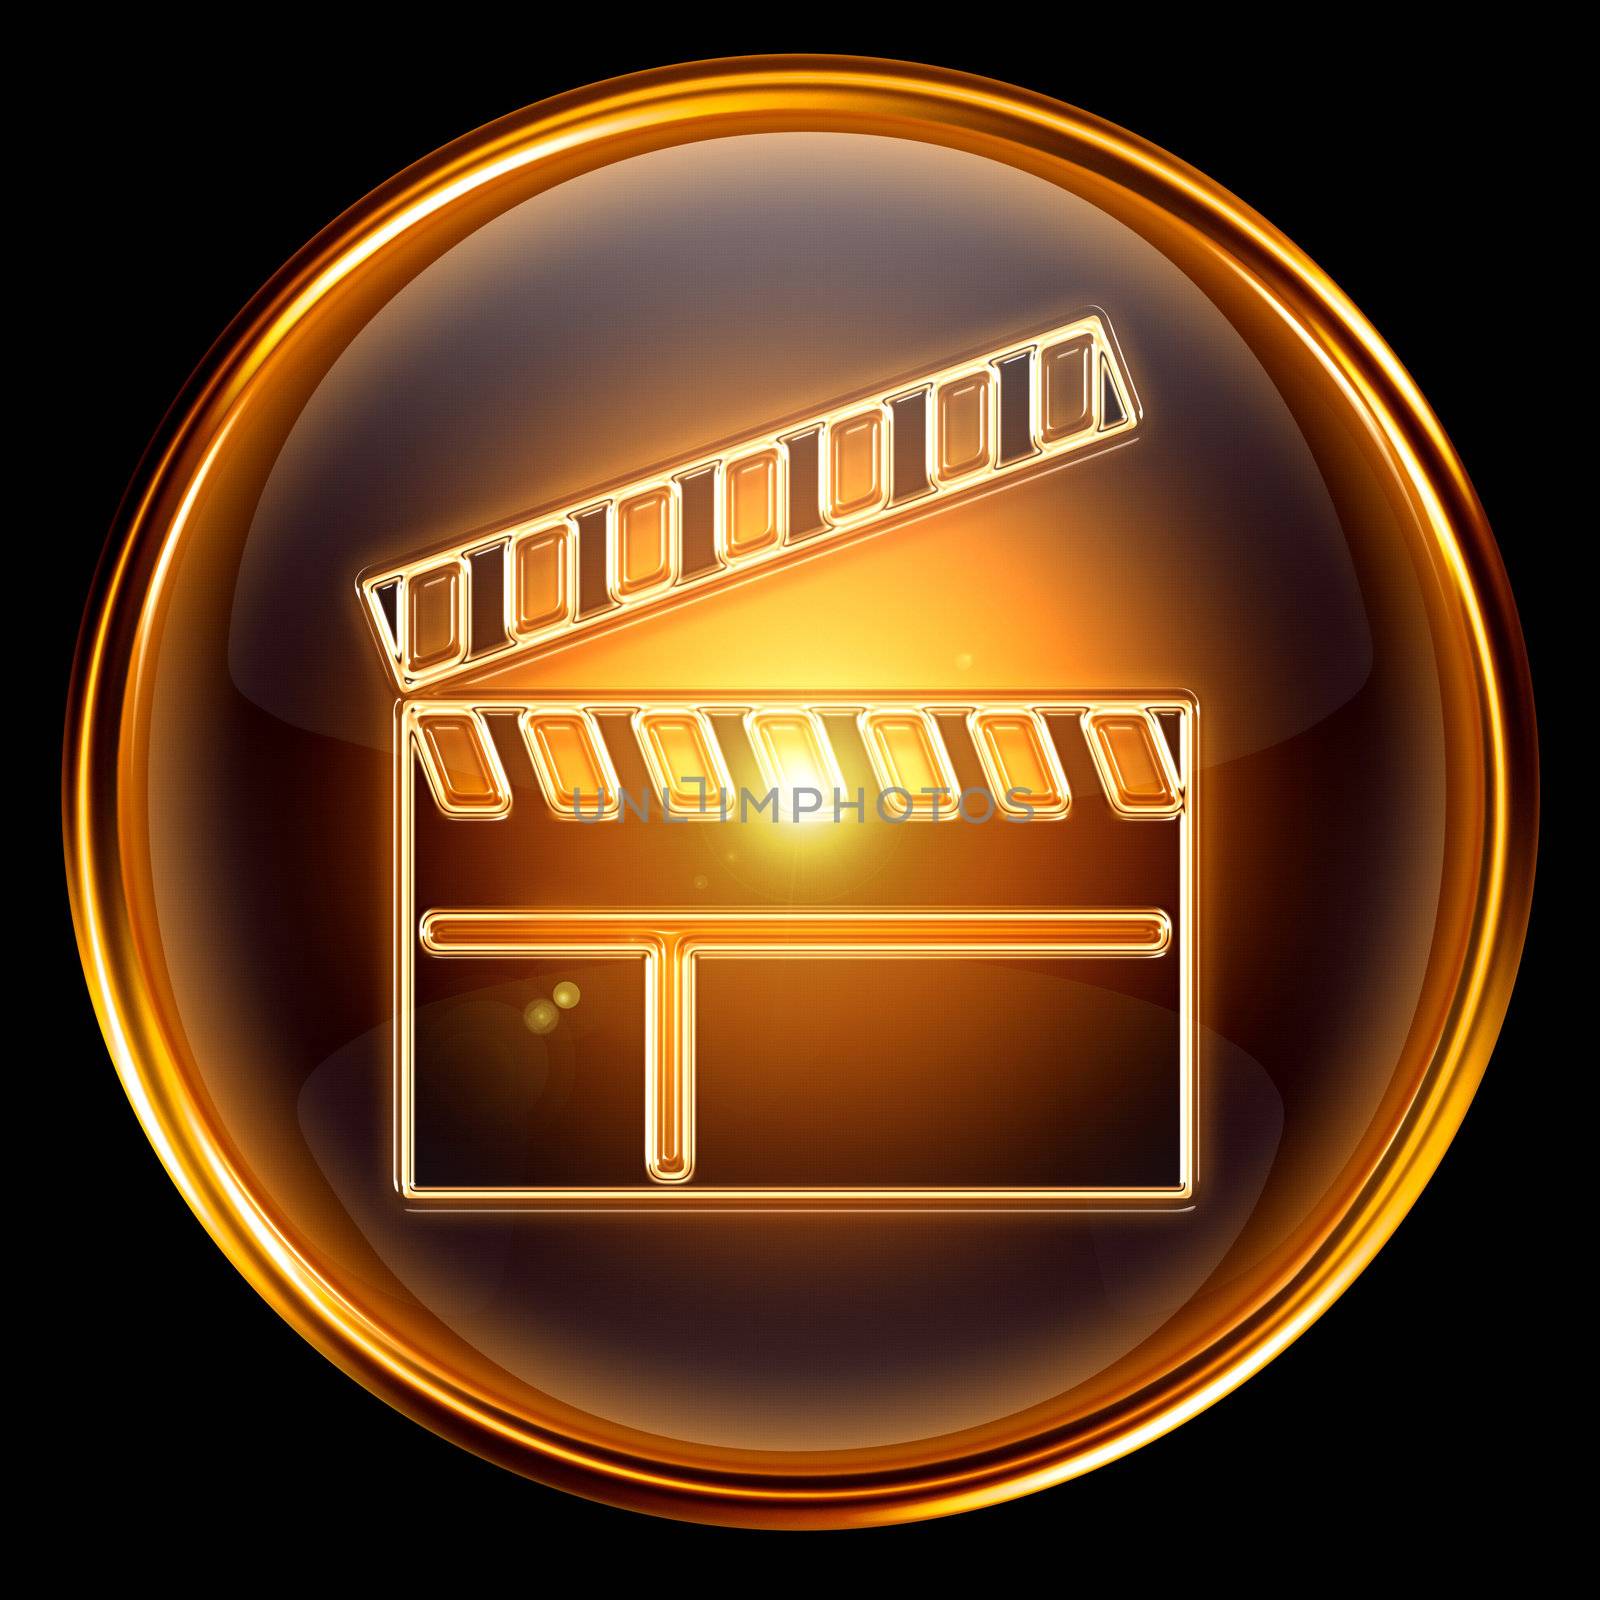 movie clapper board icon golden, isolated on black background. by zeffss